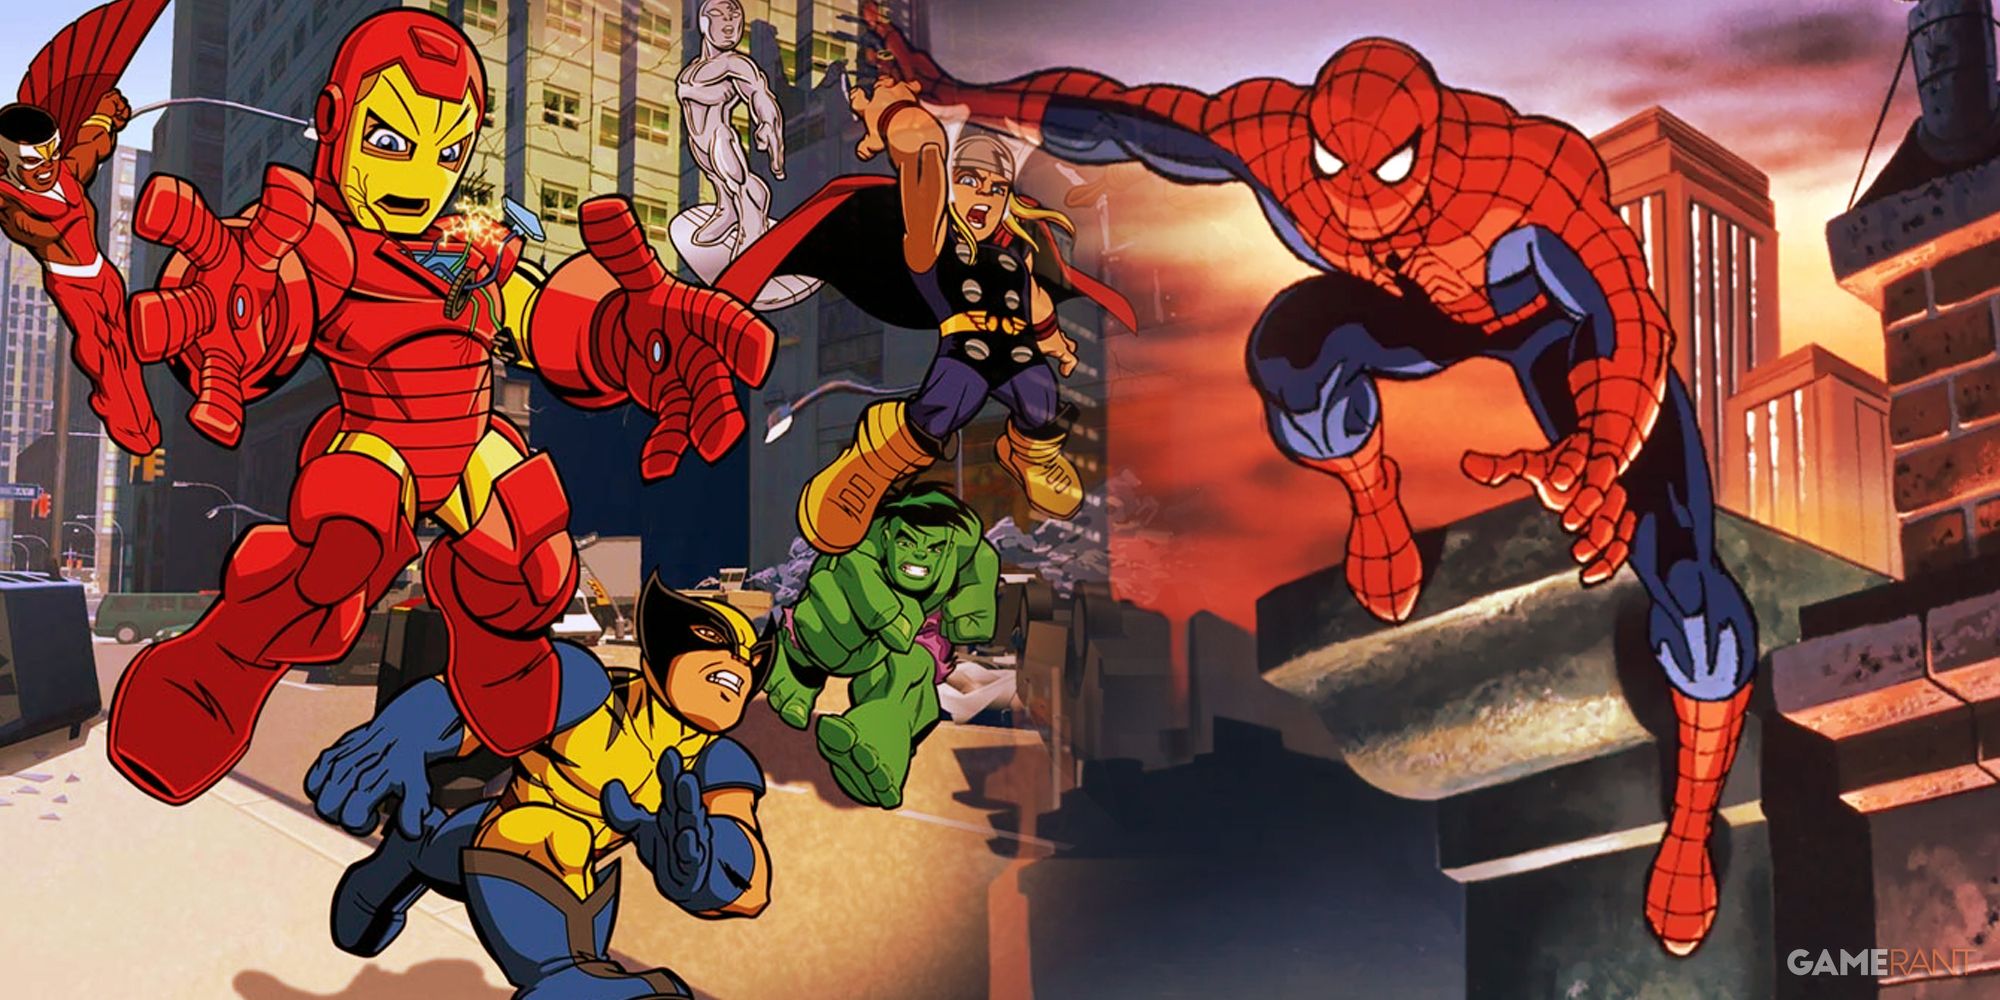 Marvel cartoons The Super Hero Squad Show, Spider-Man: The Animated Series